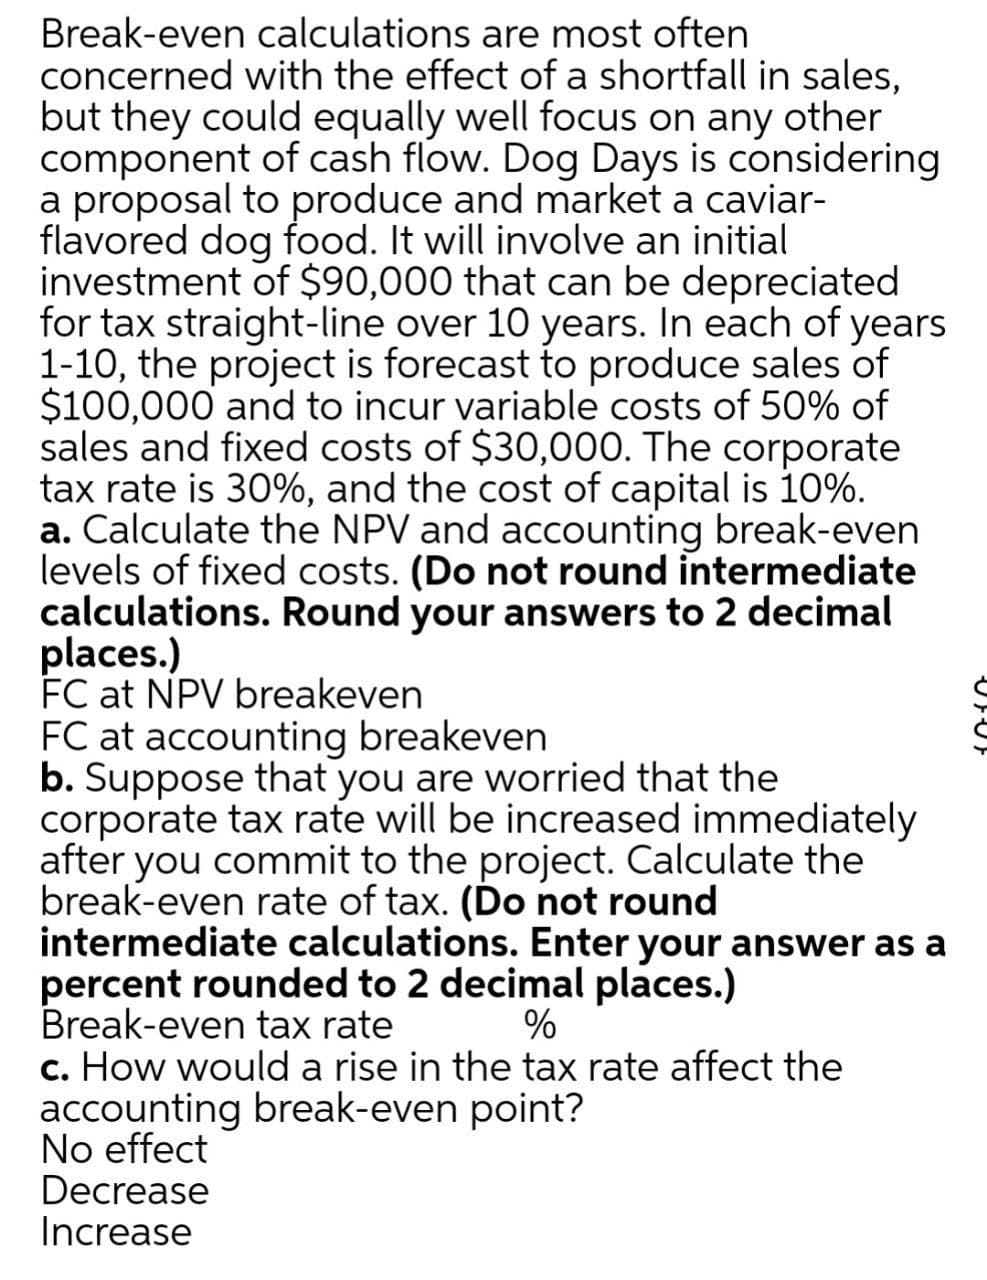 Break-even calculations are most often
concerned with the effect of a shortfall in sales,
but they could equally well focus on any other
component of cash flow. Dog Days is considering
a proposal to produce and market a caviar-
flavored dog food. It will involve an initial
investment of $90,000 that can be depreciated
for tax straight-line over 10 years. In each of years
1-10, the project is forecast to produce sales of
$100,000 and to incur variable costs of 50% of
sales and fixed costs of $30,000. The corporate
tax rate is 30%, and the cost of capital is 10%.
a. Calculate the NPV and accounting break-even
levels of fixed costs. (Do not round intermediate
calculations. Round your answers to 2 decimal
places.)
FC at NPV breakeven
FC at accounting breakeven
b. Suppose that you are worried that the
corporate tax rate will be increased immediately
after you commit to the project. Calculate the
break-even rate of tax. (Do not round
intermediate calculations. Enter your answer as a
percent rounded to 2 decimal places.)
Break-even tax rate
c. How would a rise in the tax rate affect the
accounting break-even point?
No effect
Decrease
Increase
